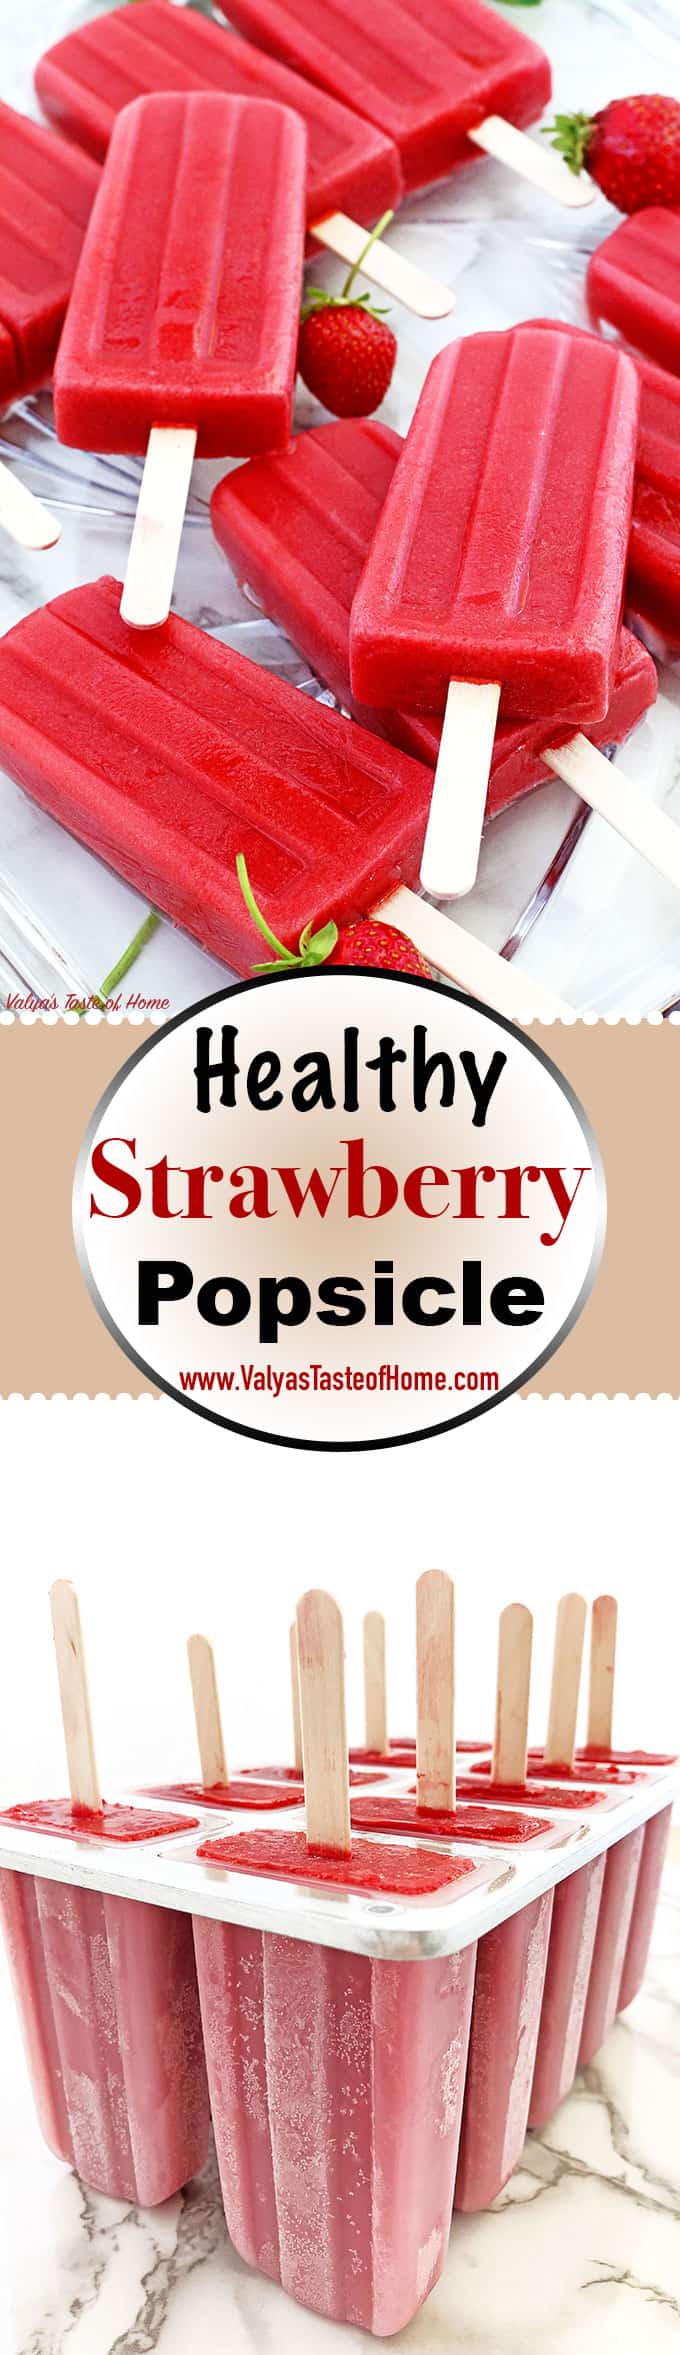 clean eating, dairy free, easy recipe, fresh strawberries, garden strawberries, gluten free, healthy, Healthy Strawberry Popsicles Recipe, homegrown strawberries, homemade popsicles, kid friendly, maple from Canada, organic maple syrup, popsicles, vanilla cashew milk, vegan